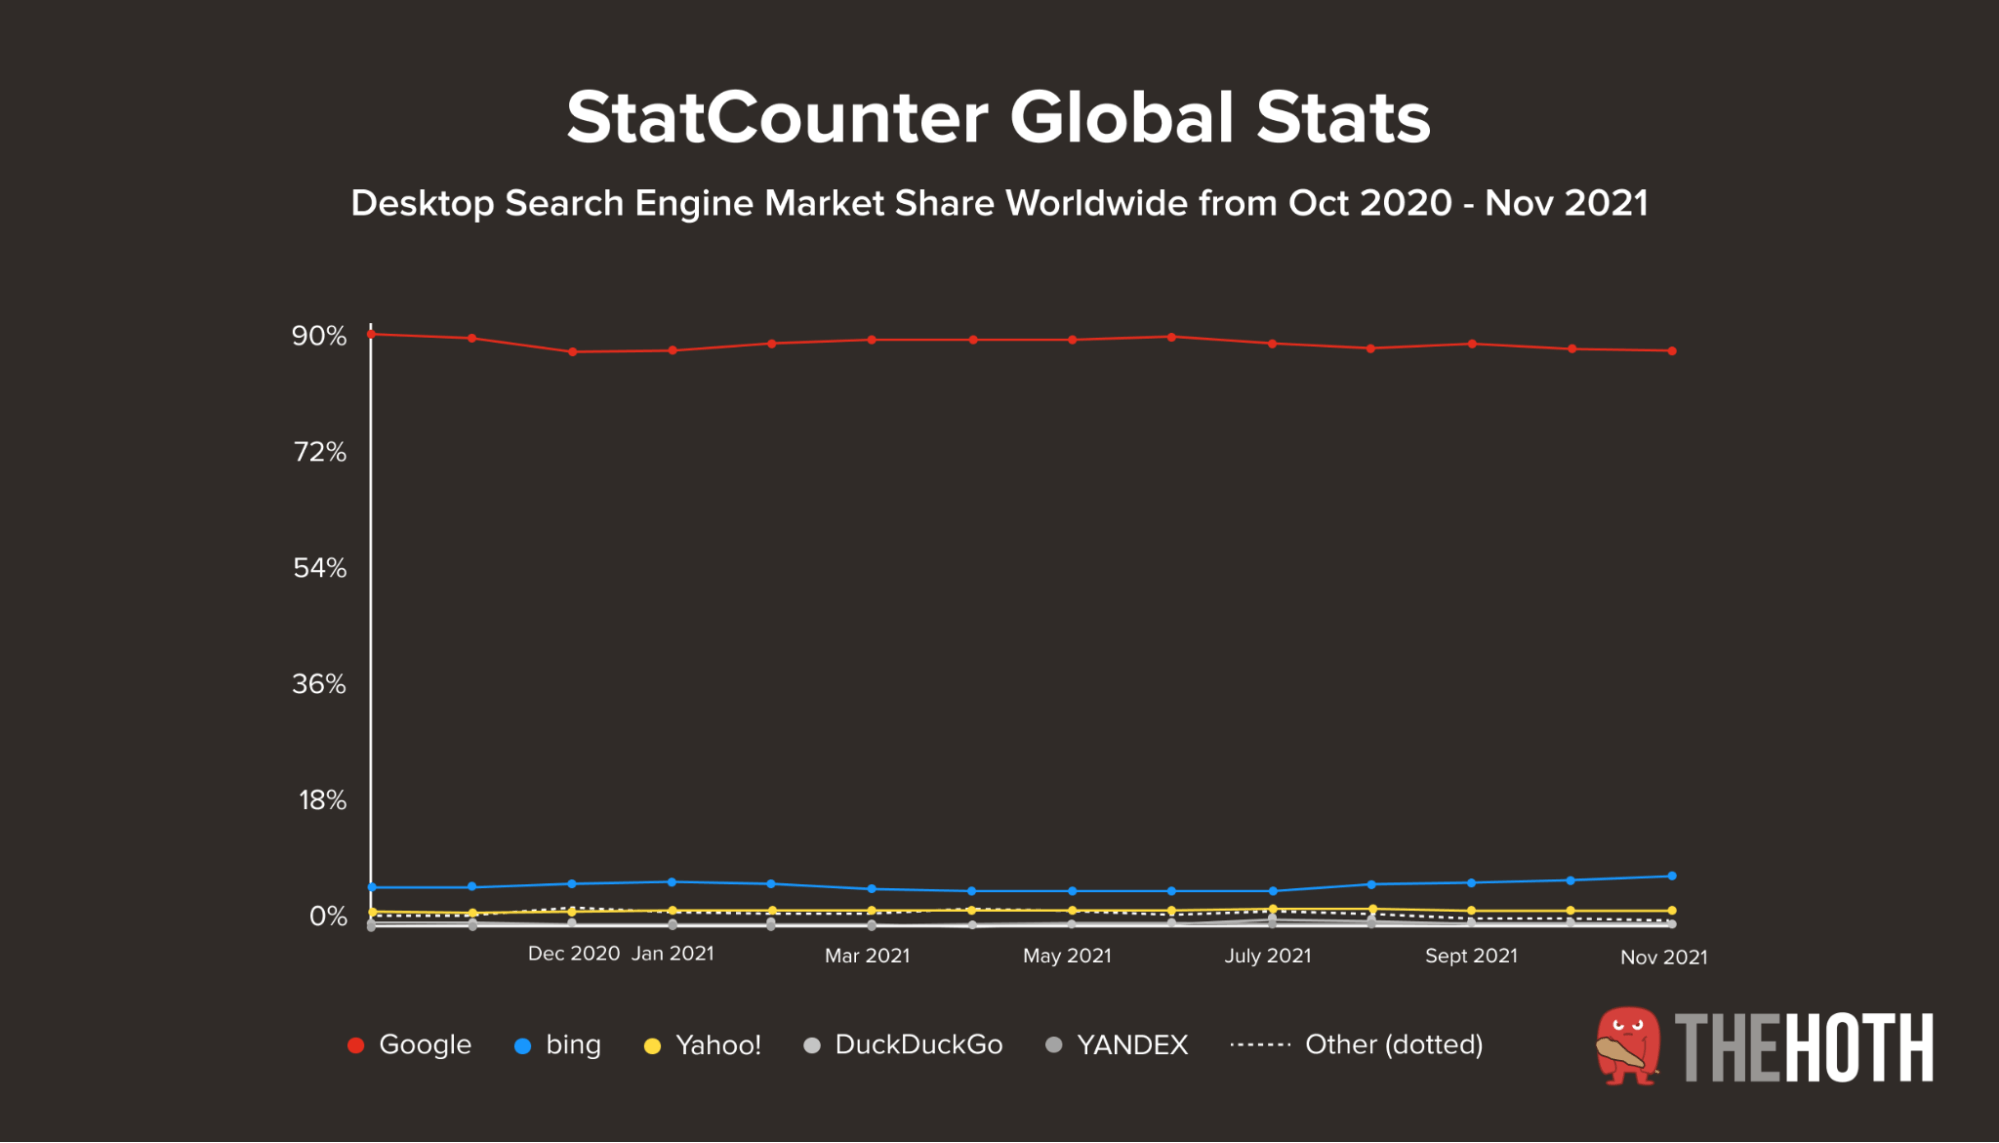 Statcounter’s global search engine market share graph